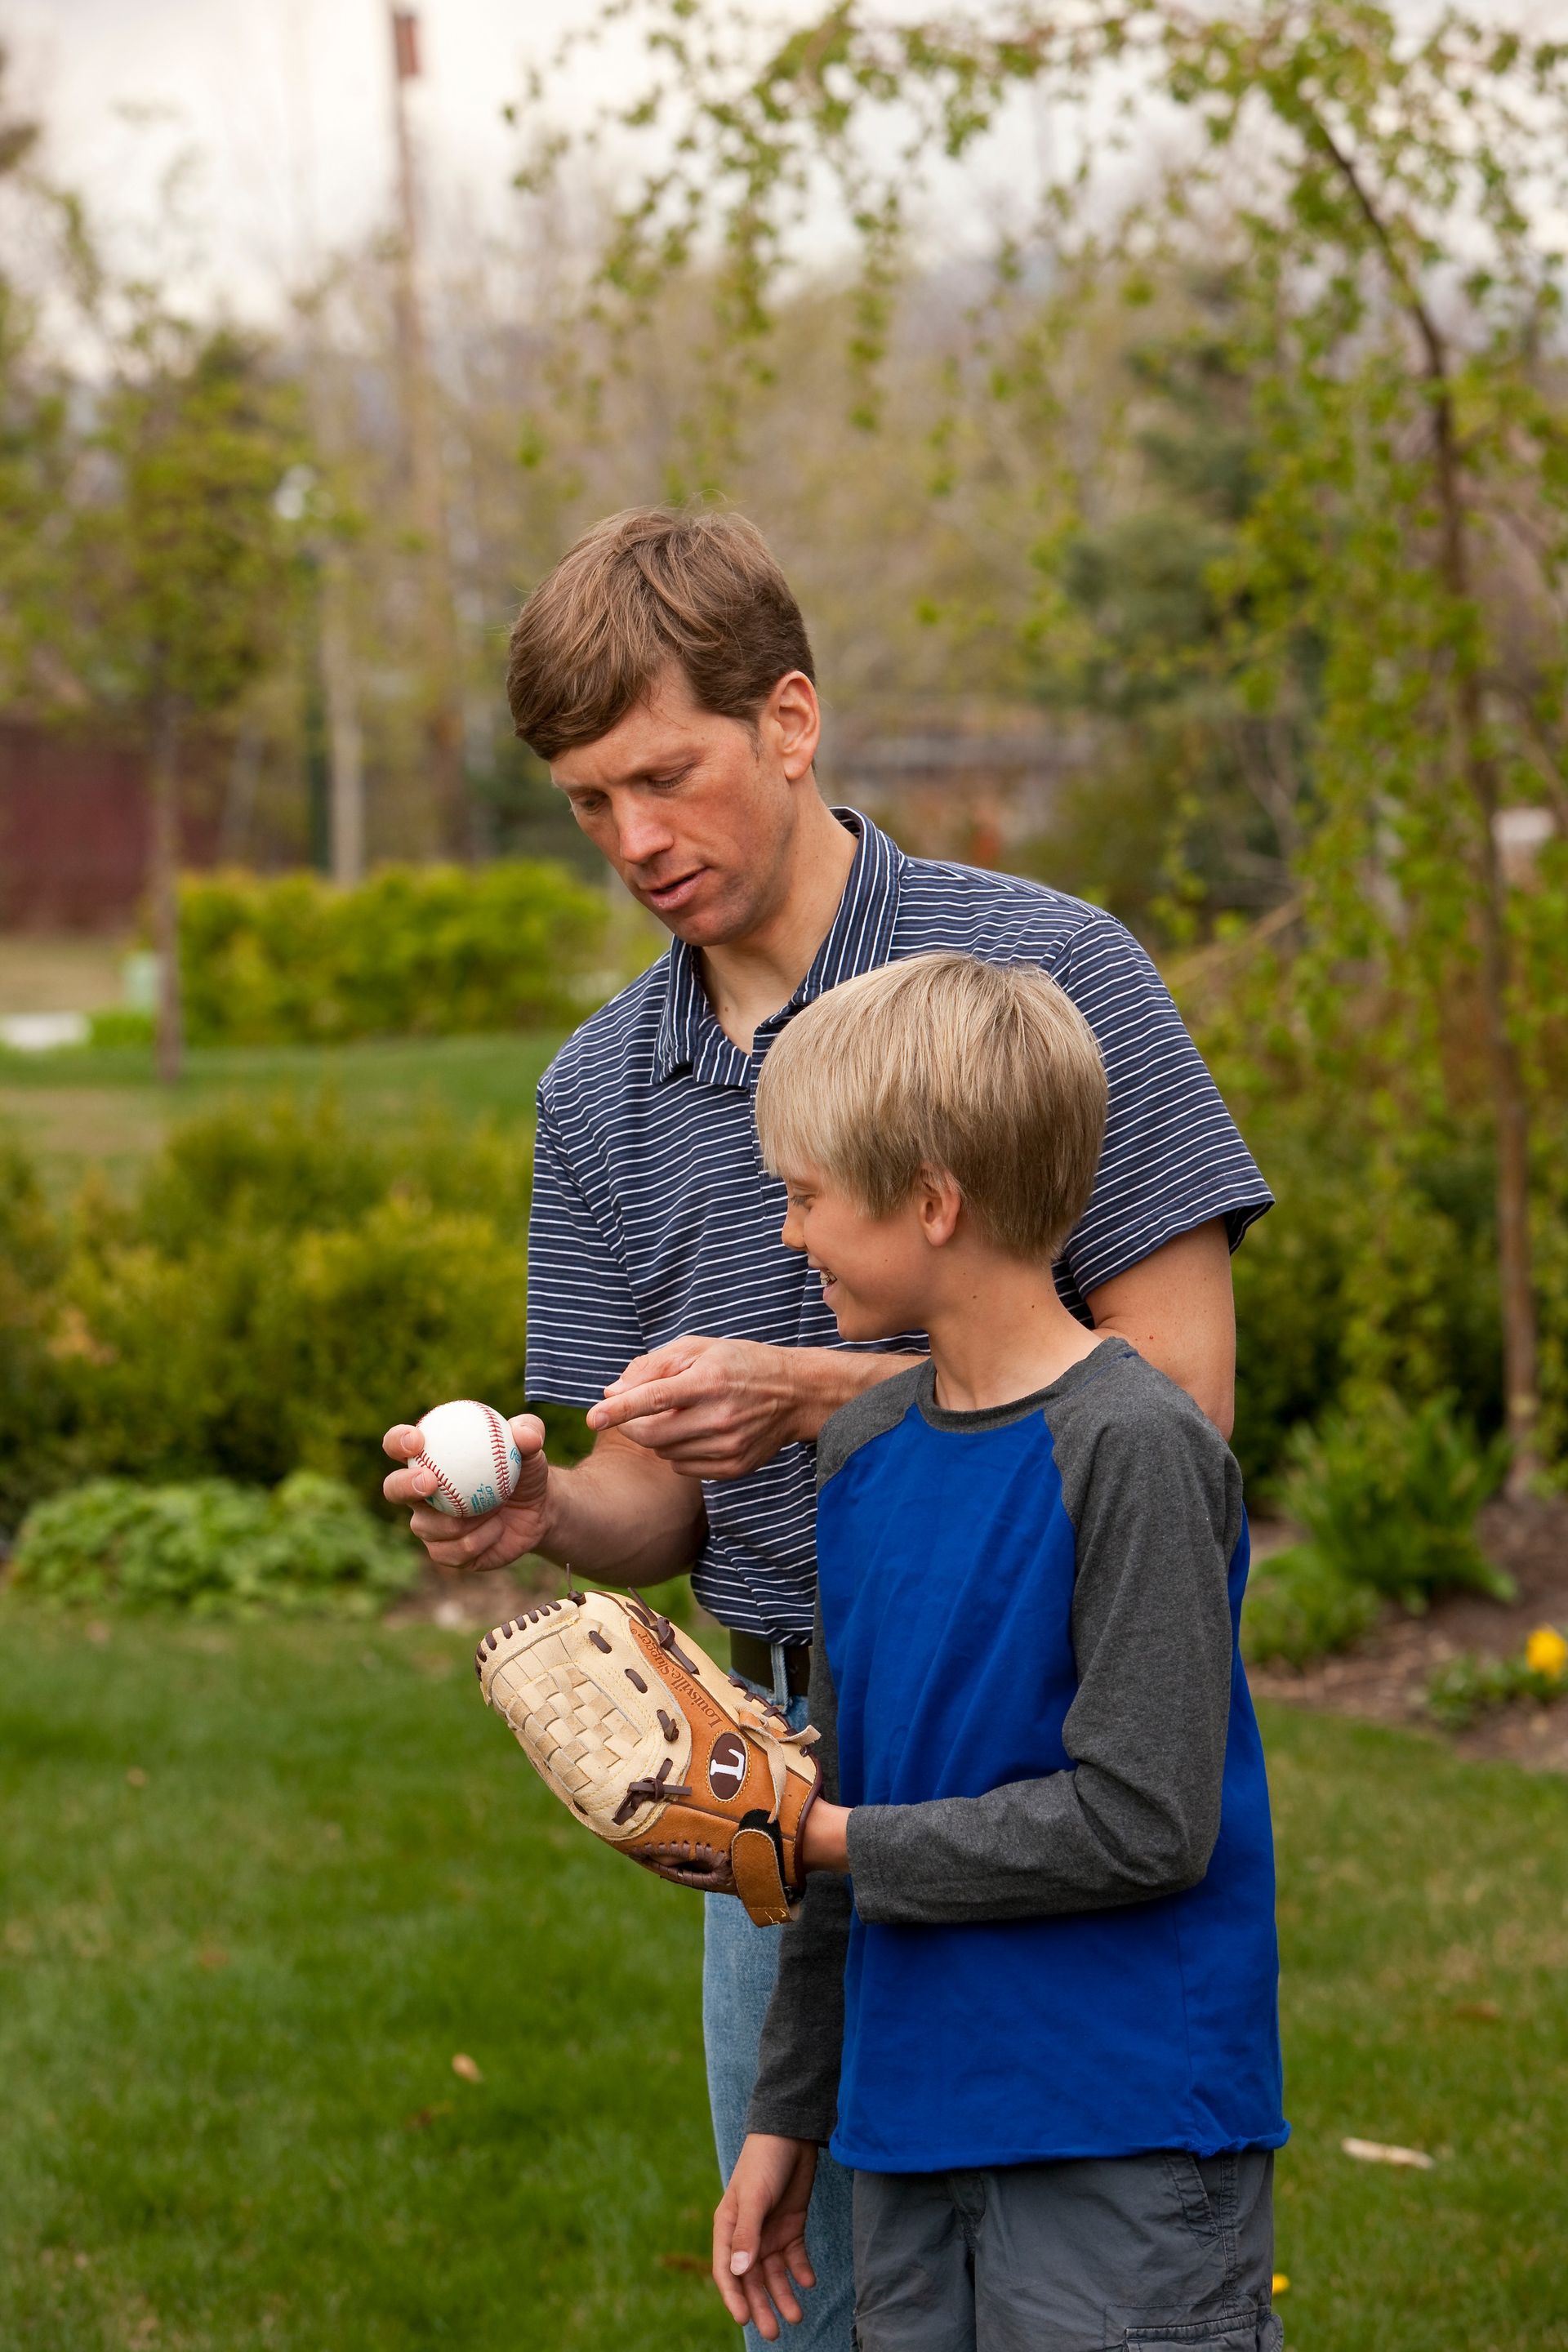 A father plays baseball with his son.